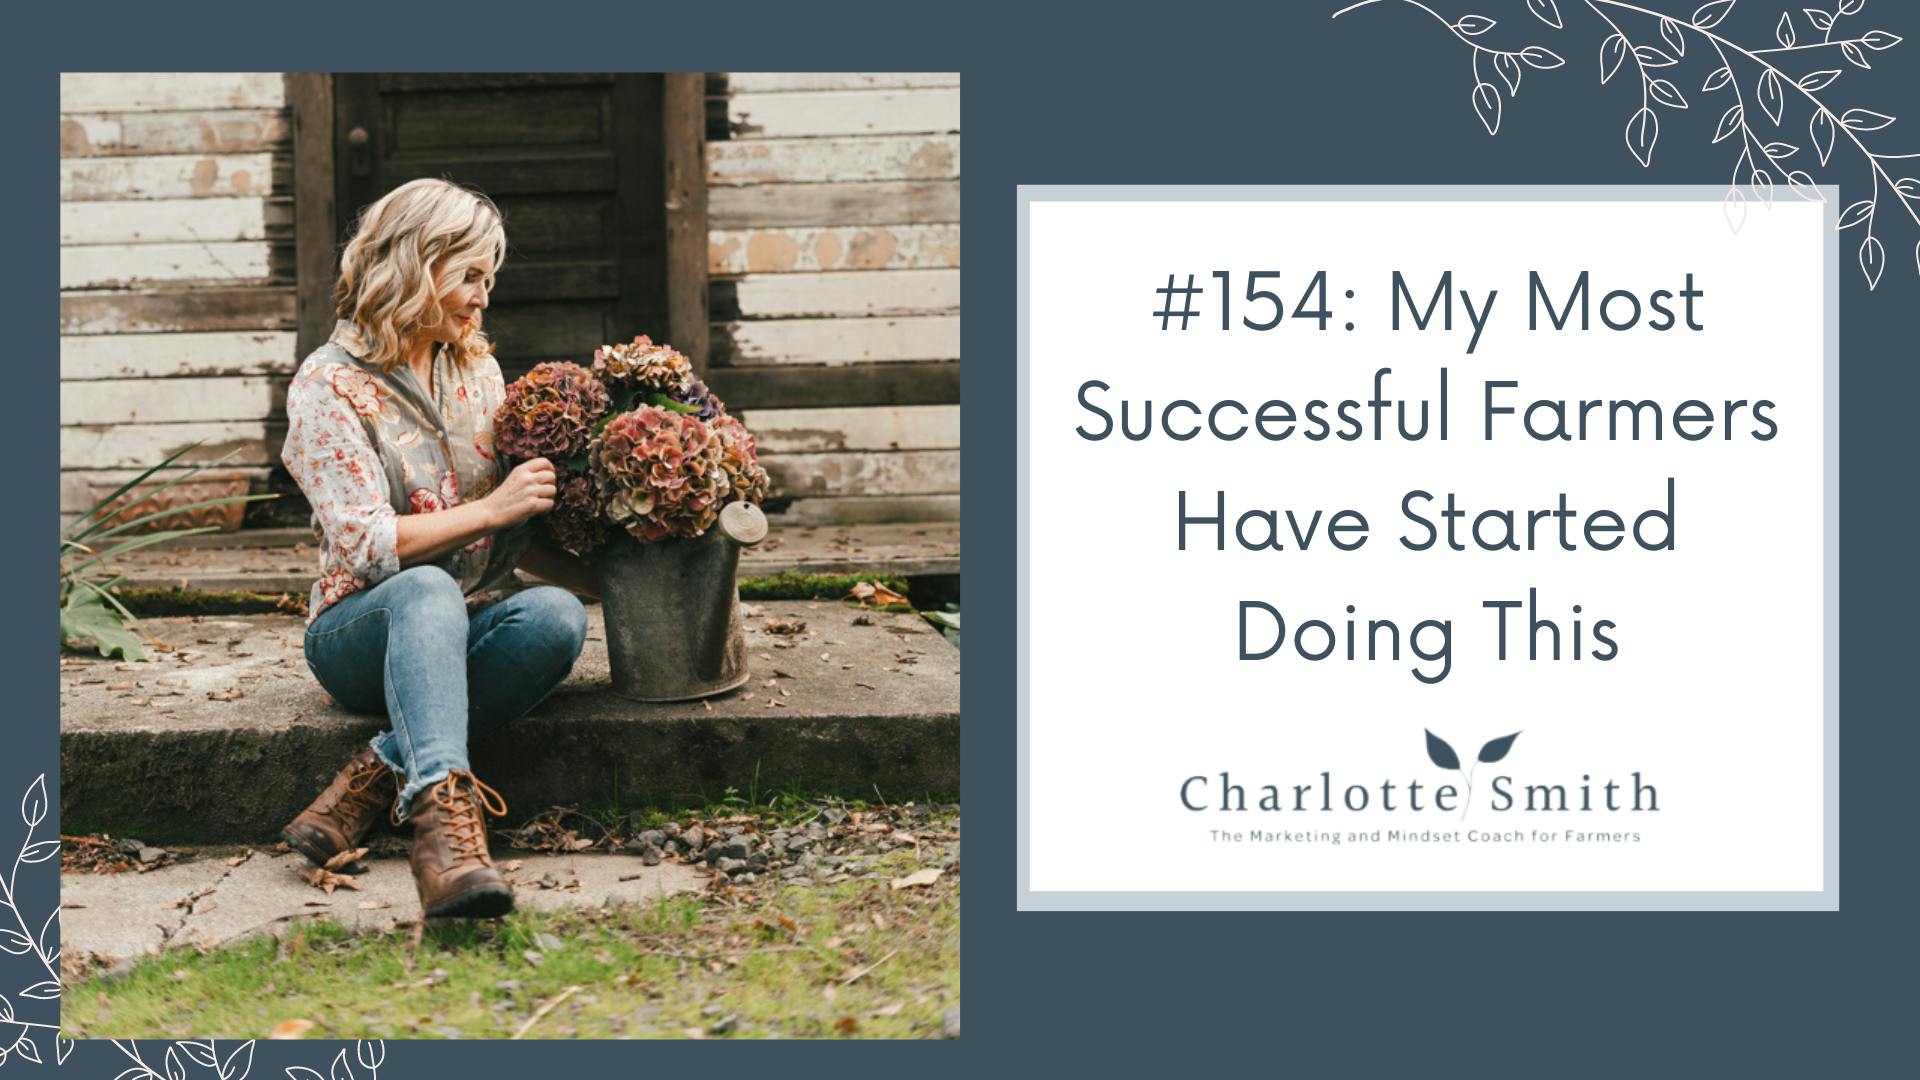 https://charlottemsmith.com/154-my-most-successful-farmers-start-doing-this/